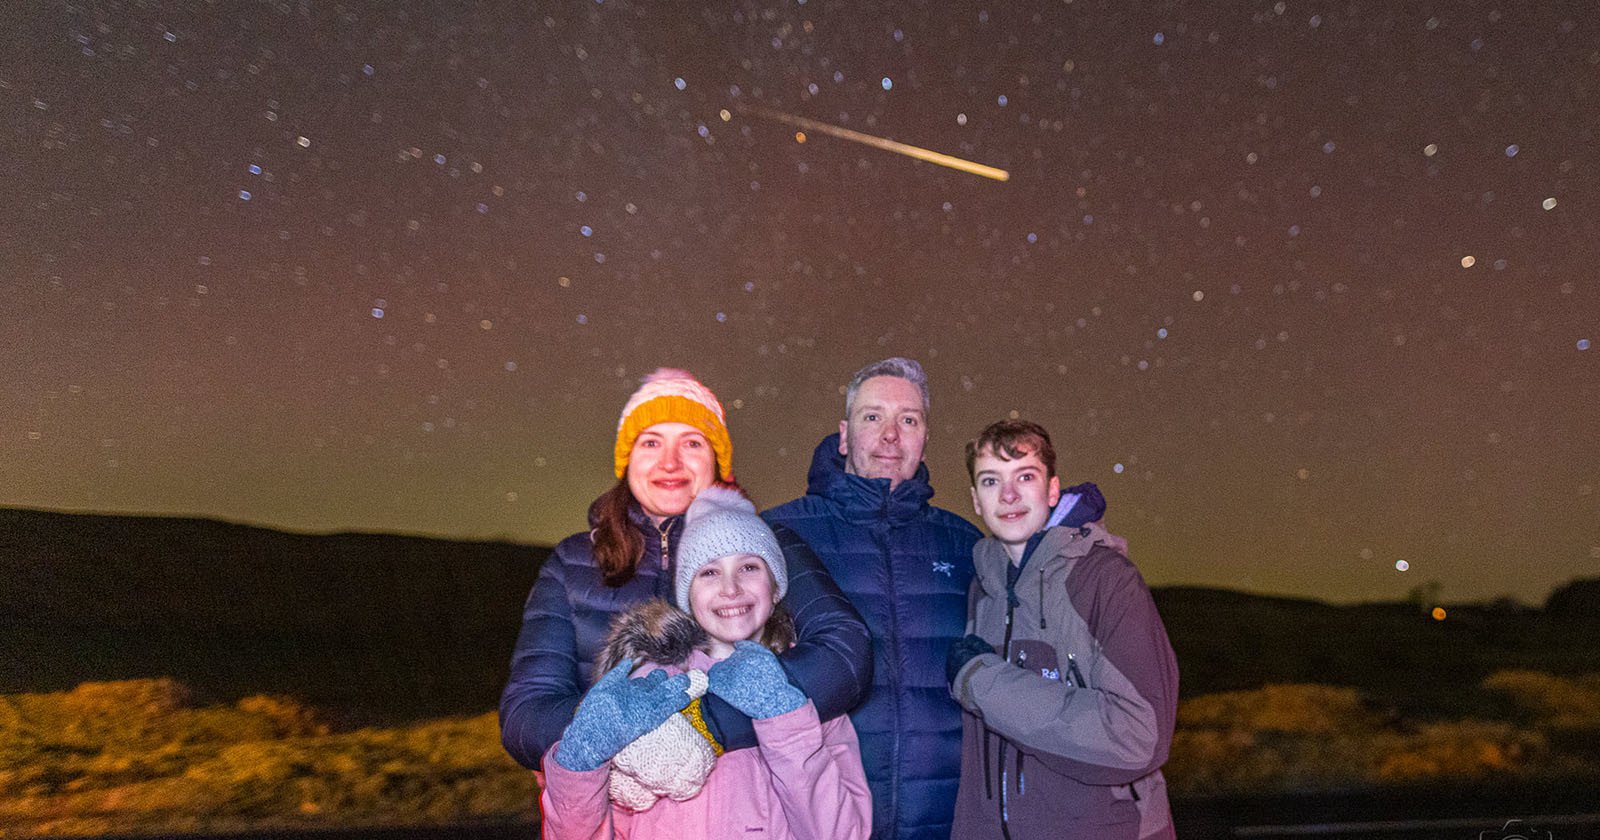 Lucky Photographer Catches Shooting Star in Family Photo